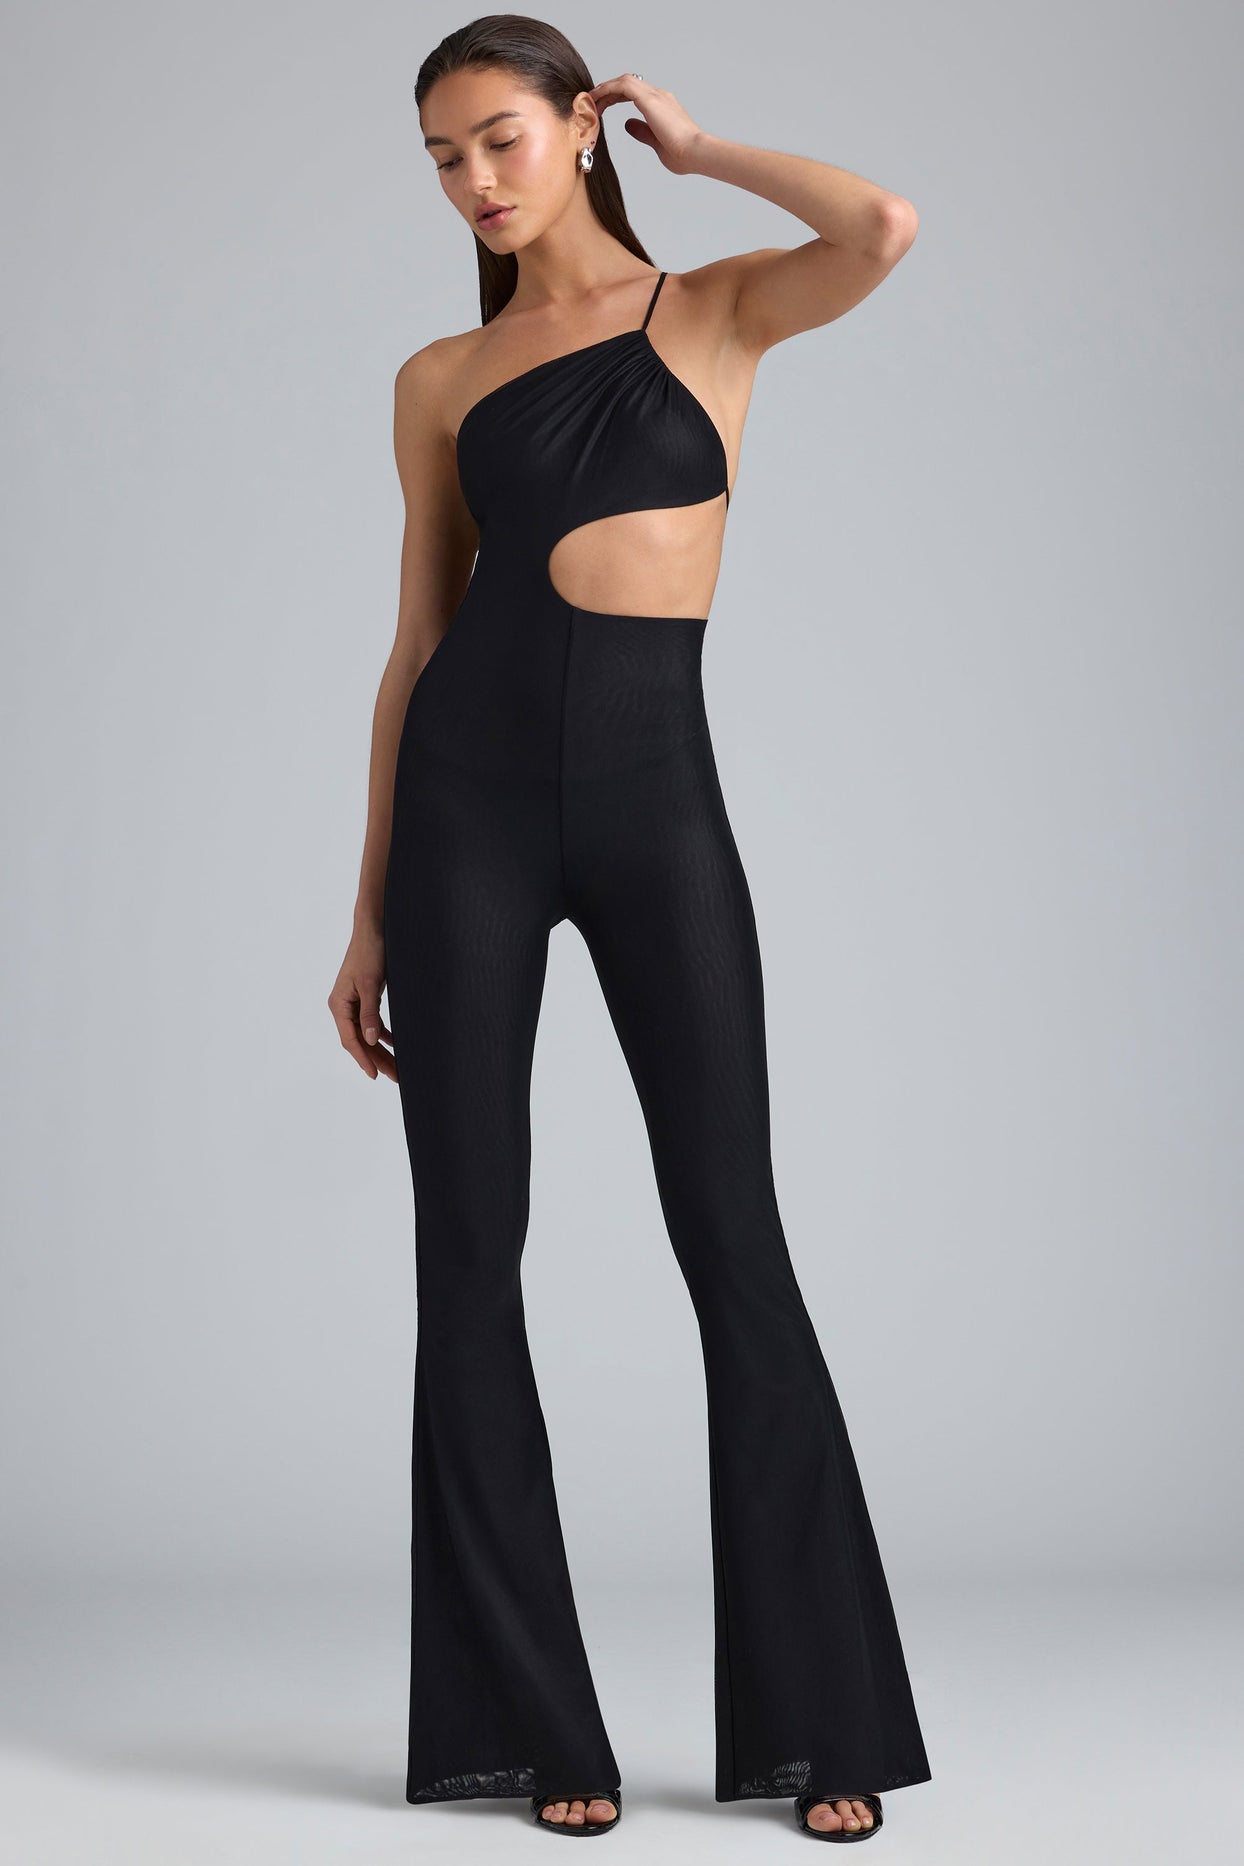 Amara Metallic Ruched Cut-Out Flared Jumpsuit in Black | Oh Polly